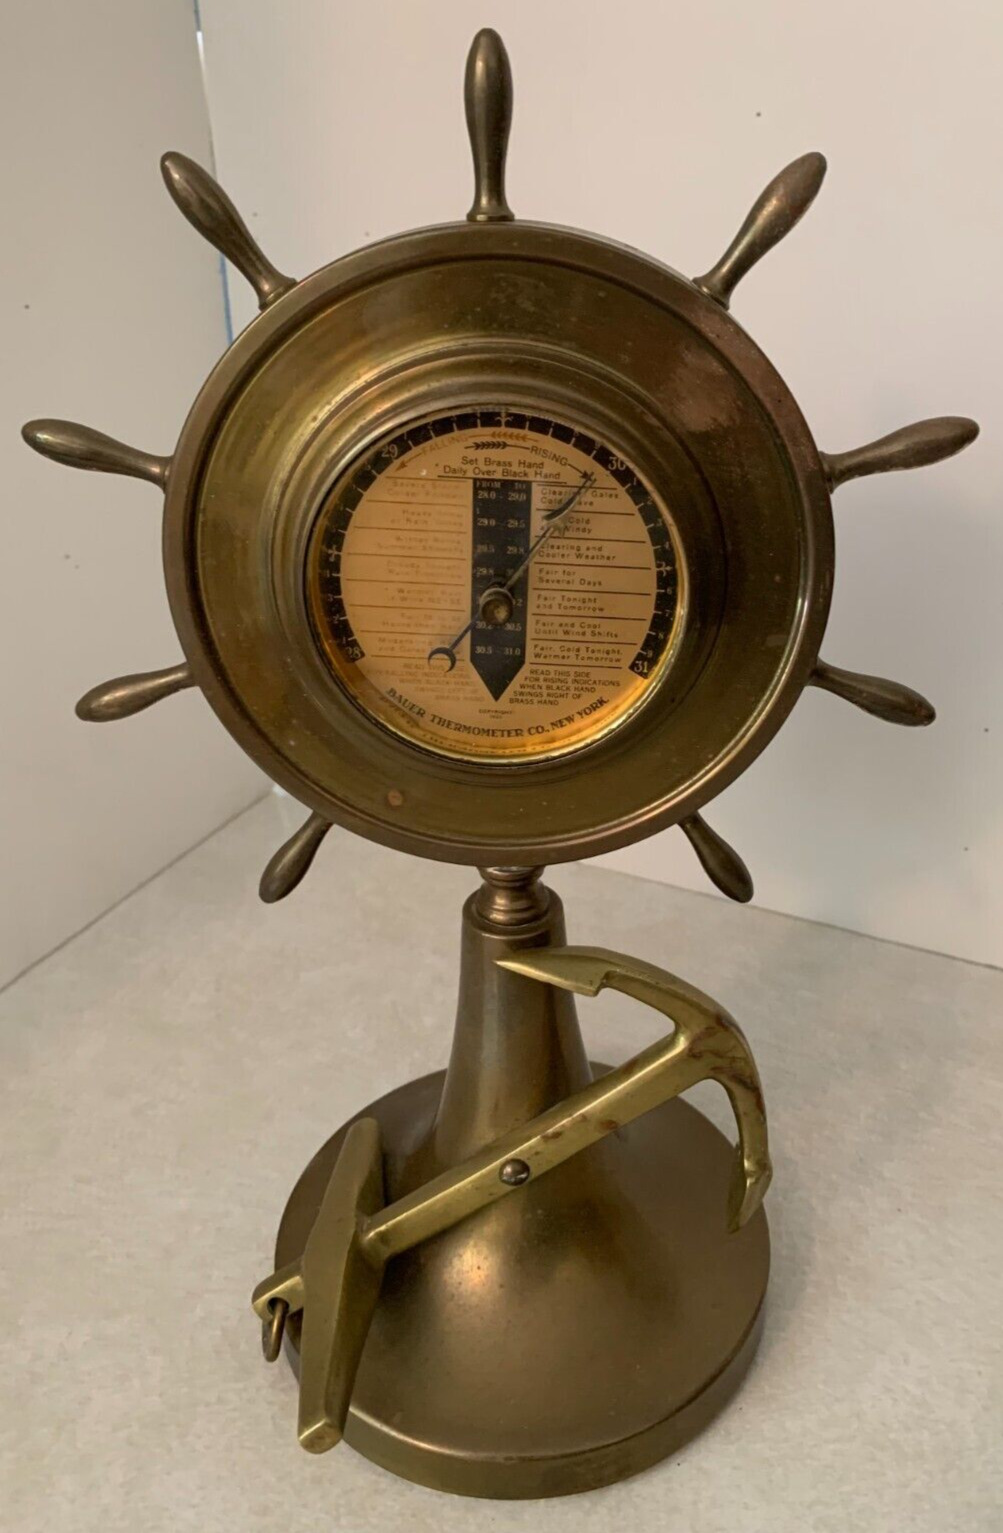 RARE Vintage Weather Station Barometer Brass Bauer Thermometer Co NY Maritime